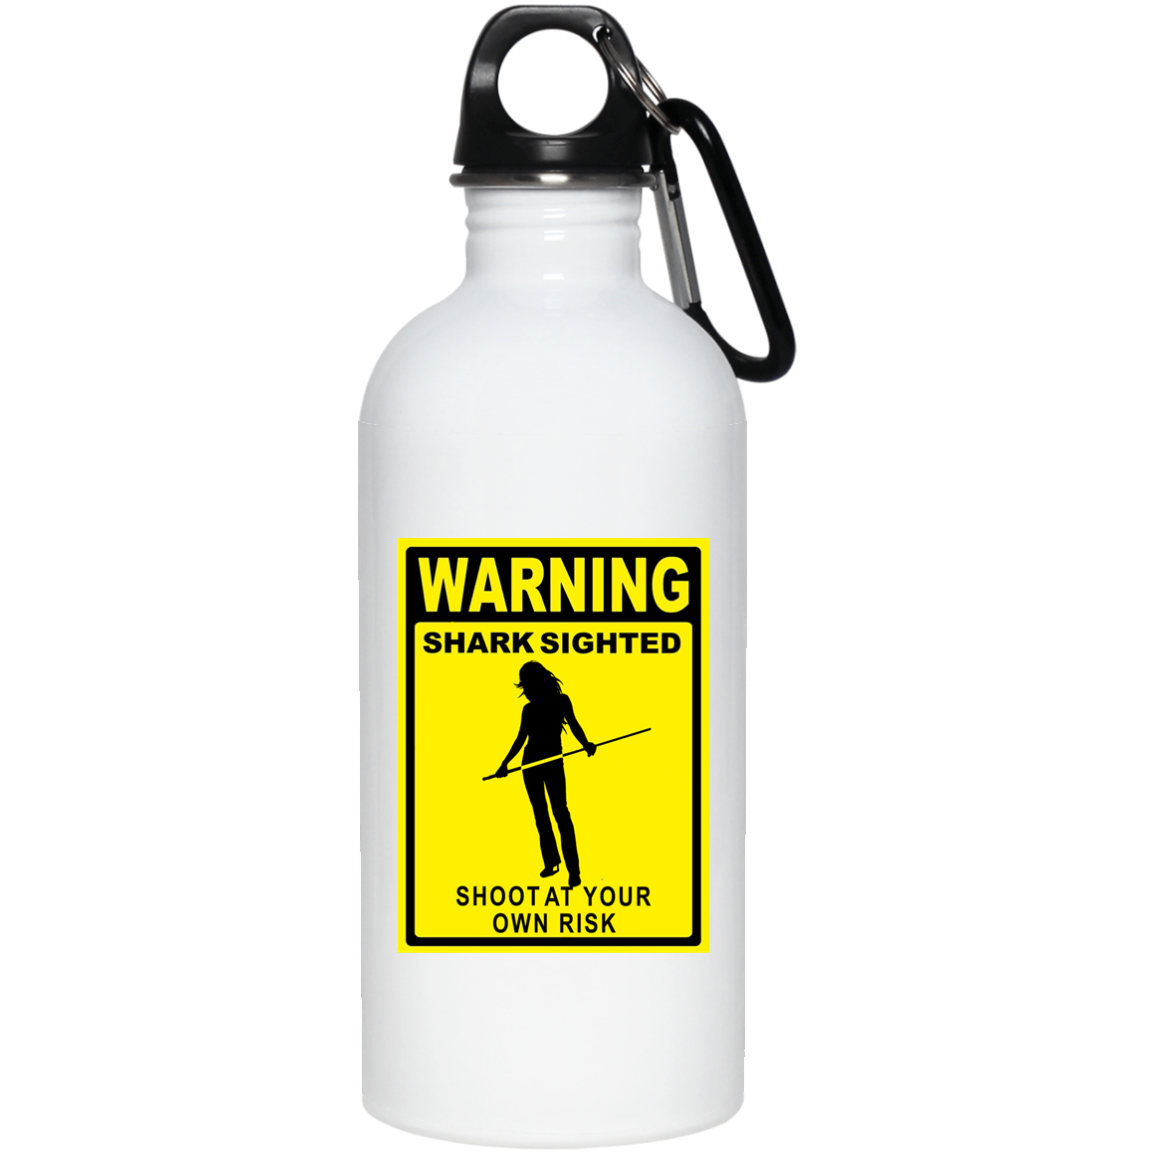 The GHOATS custom design #36. Shark Sighted. Female Pool Shark. Shoot At Your Own Risk. Pool / Billiards. 20 oz. Stainless Steel Water Bottle